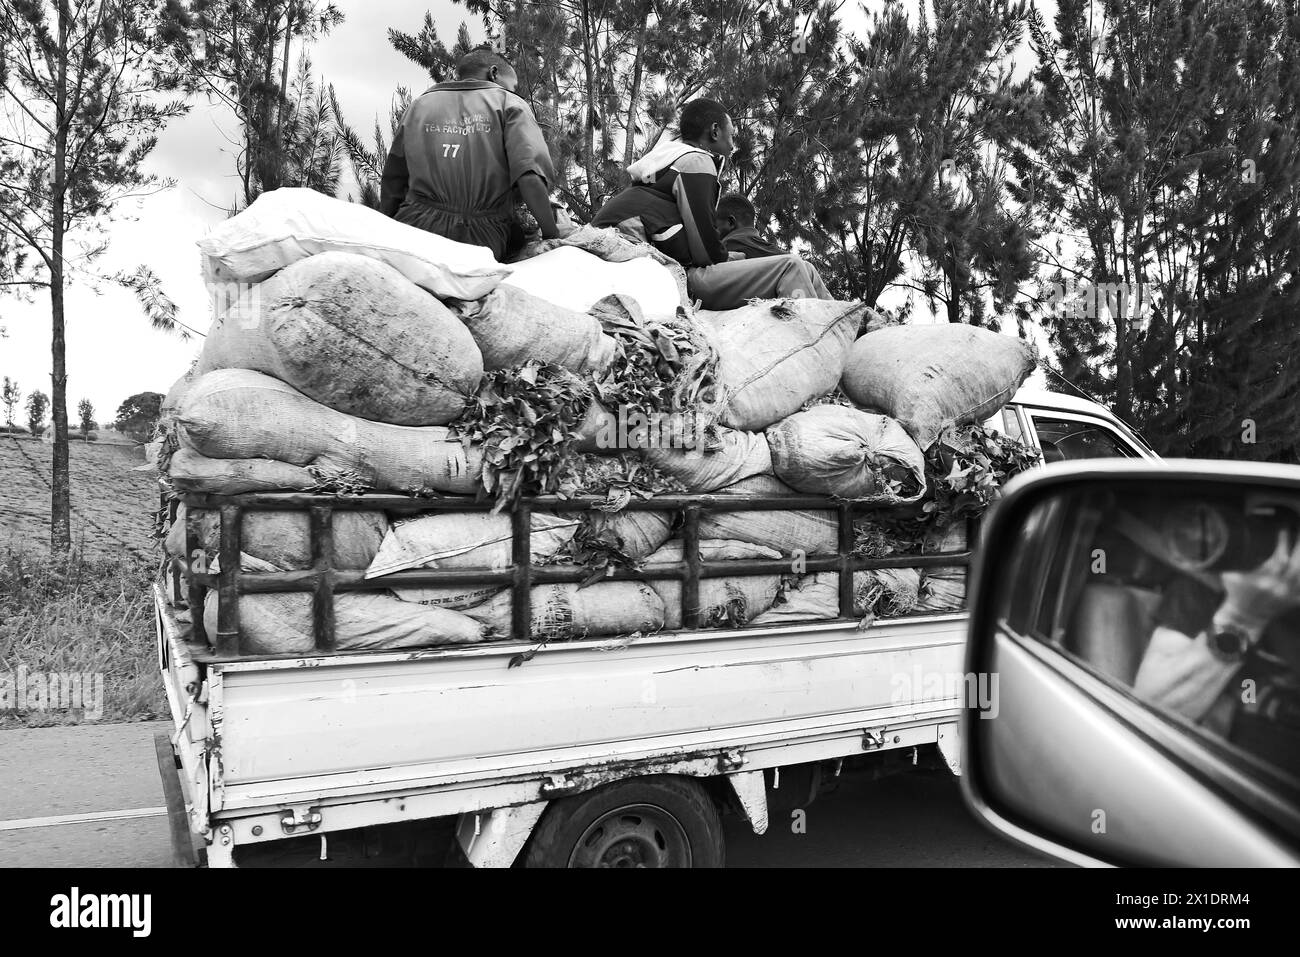 Young Ugandan workers, dressed in vibrant colors, chat and relax atop large fruit sacks in the back of a black and white photograph, en route to Masin Stock Photo